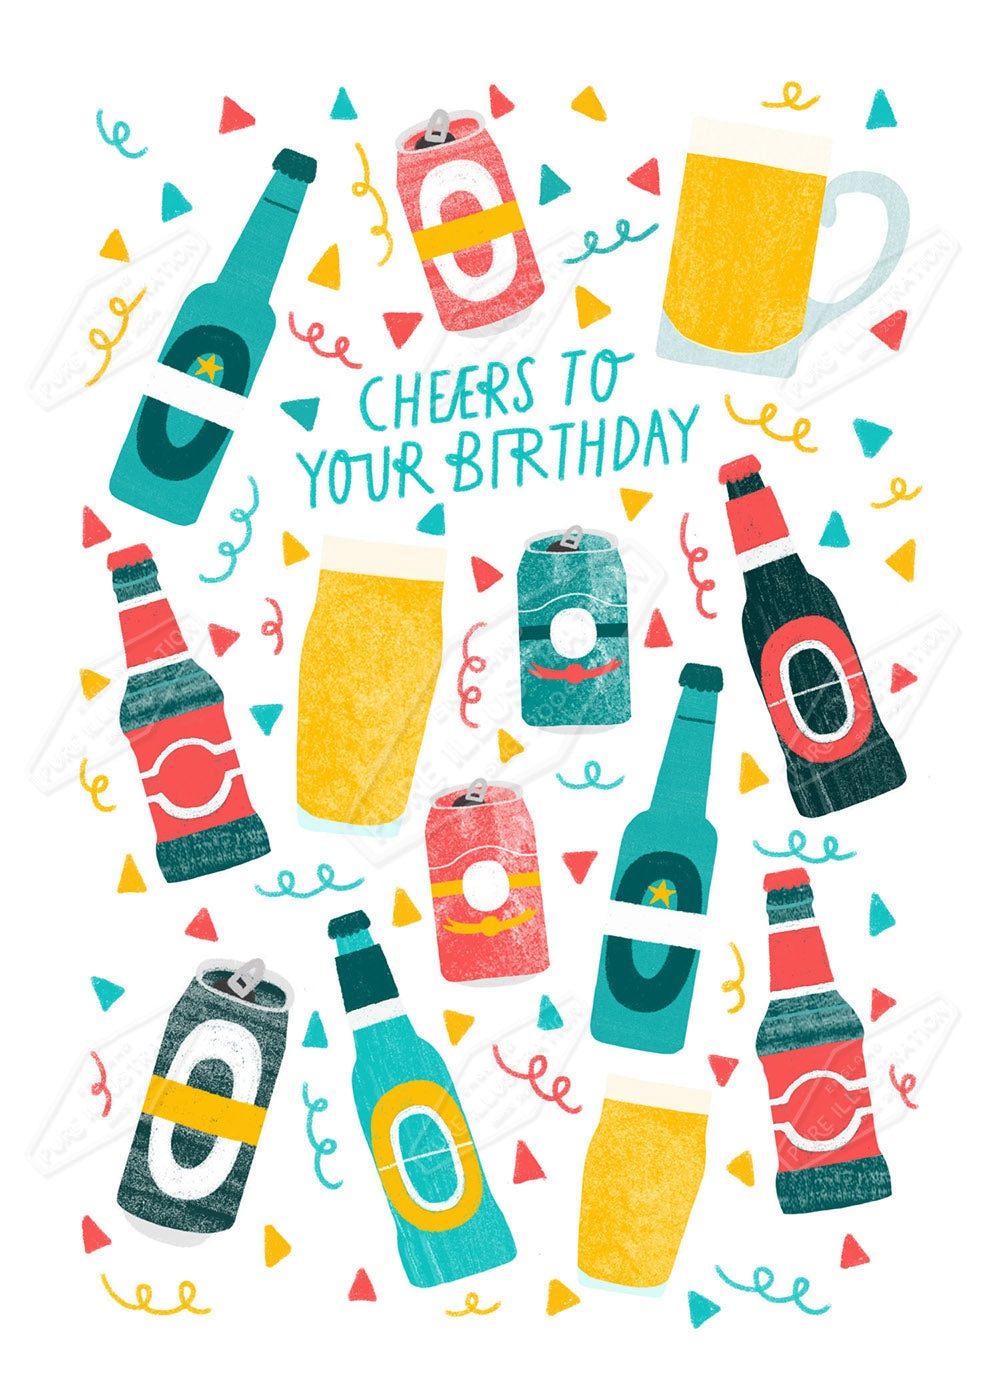 Birthday Cheers by Leah Brideaux for Pure Art Licensing Agency & Surface Design Studio